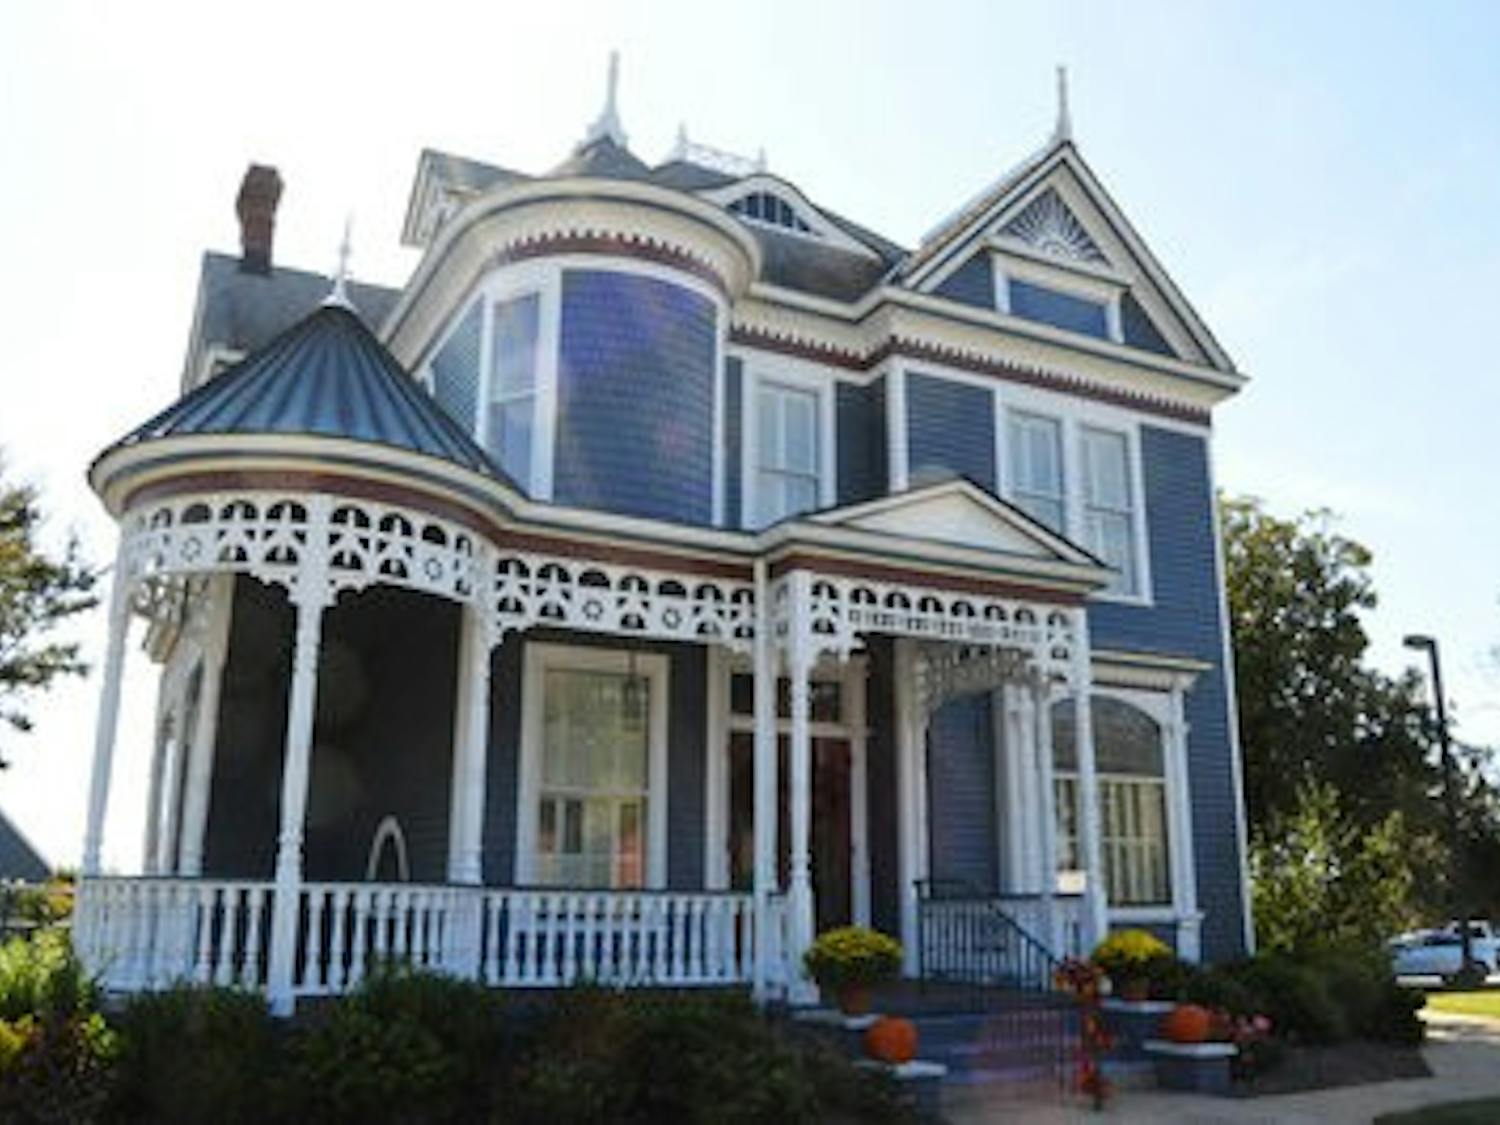 Built in 1895, by the John Whitfield family, the house has been repurposed several times.